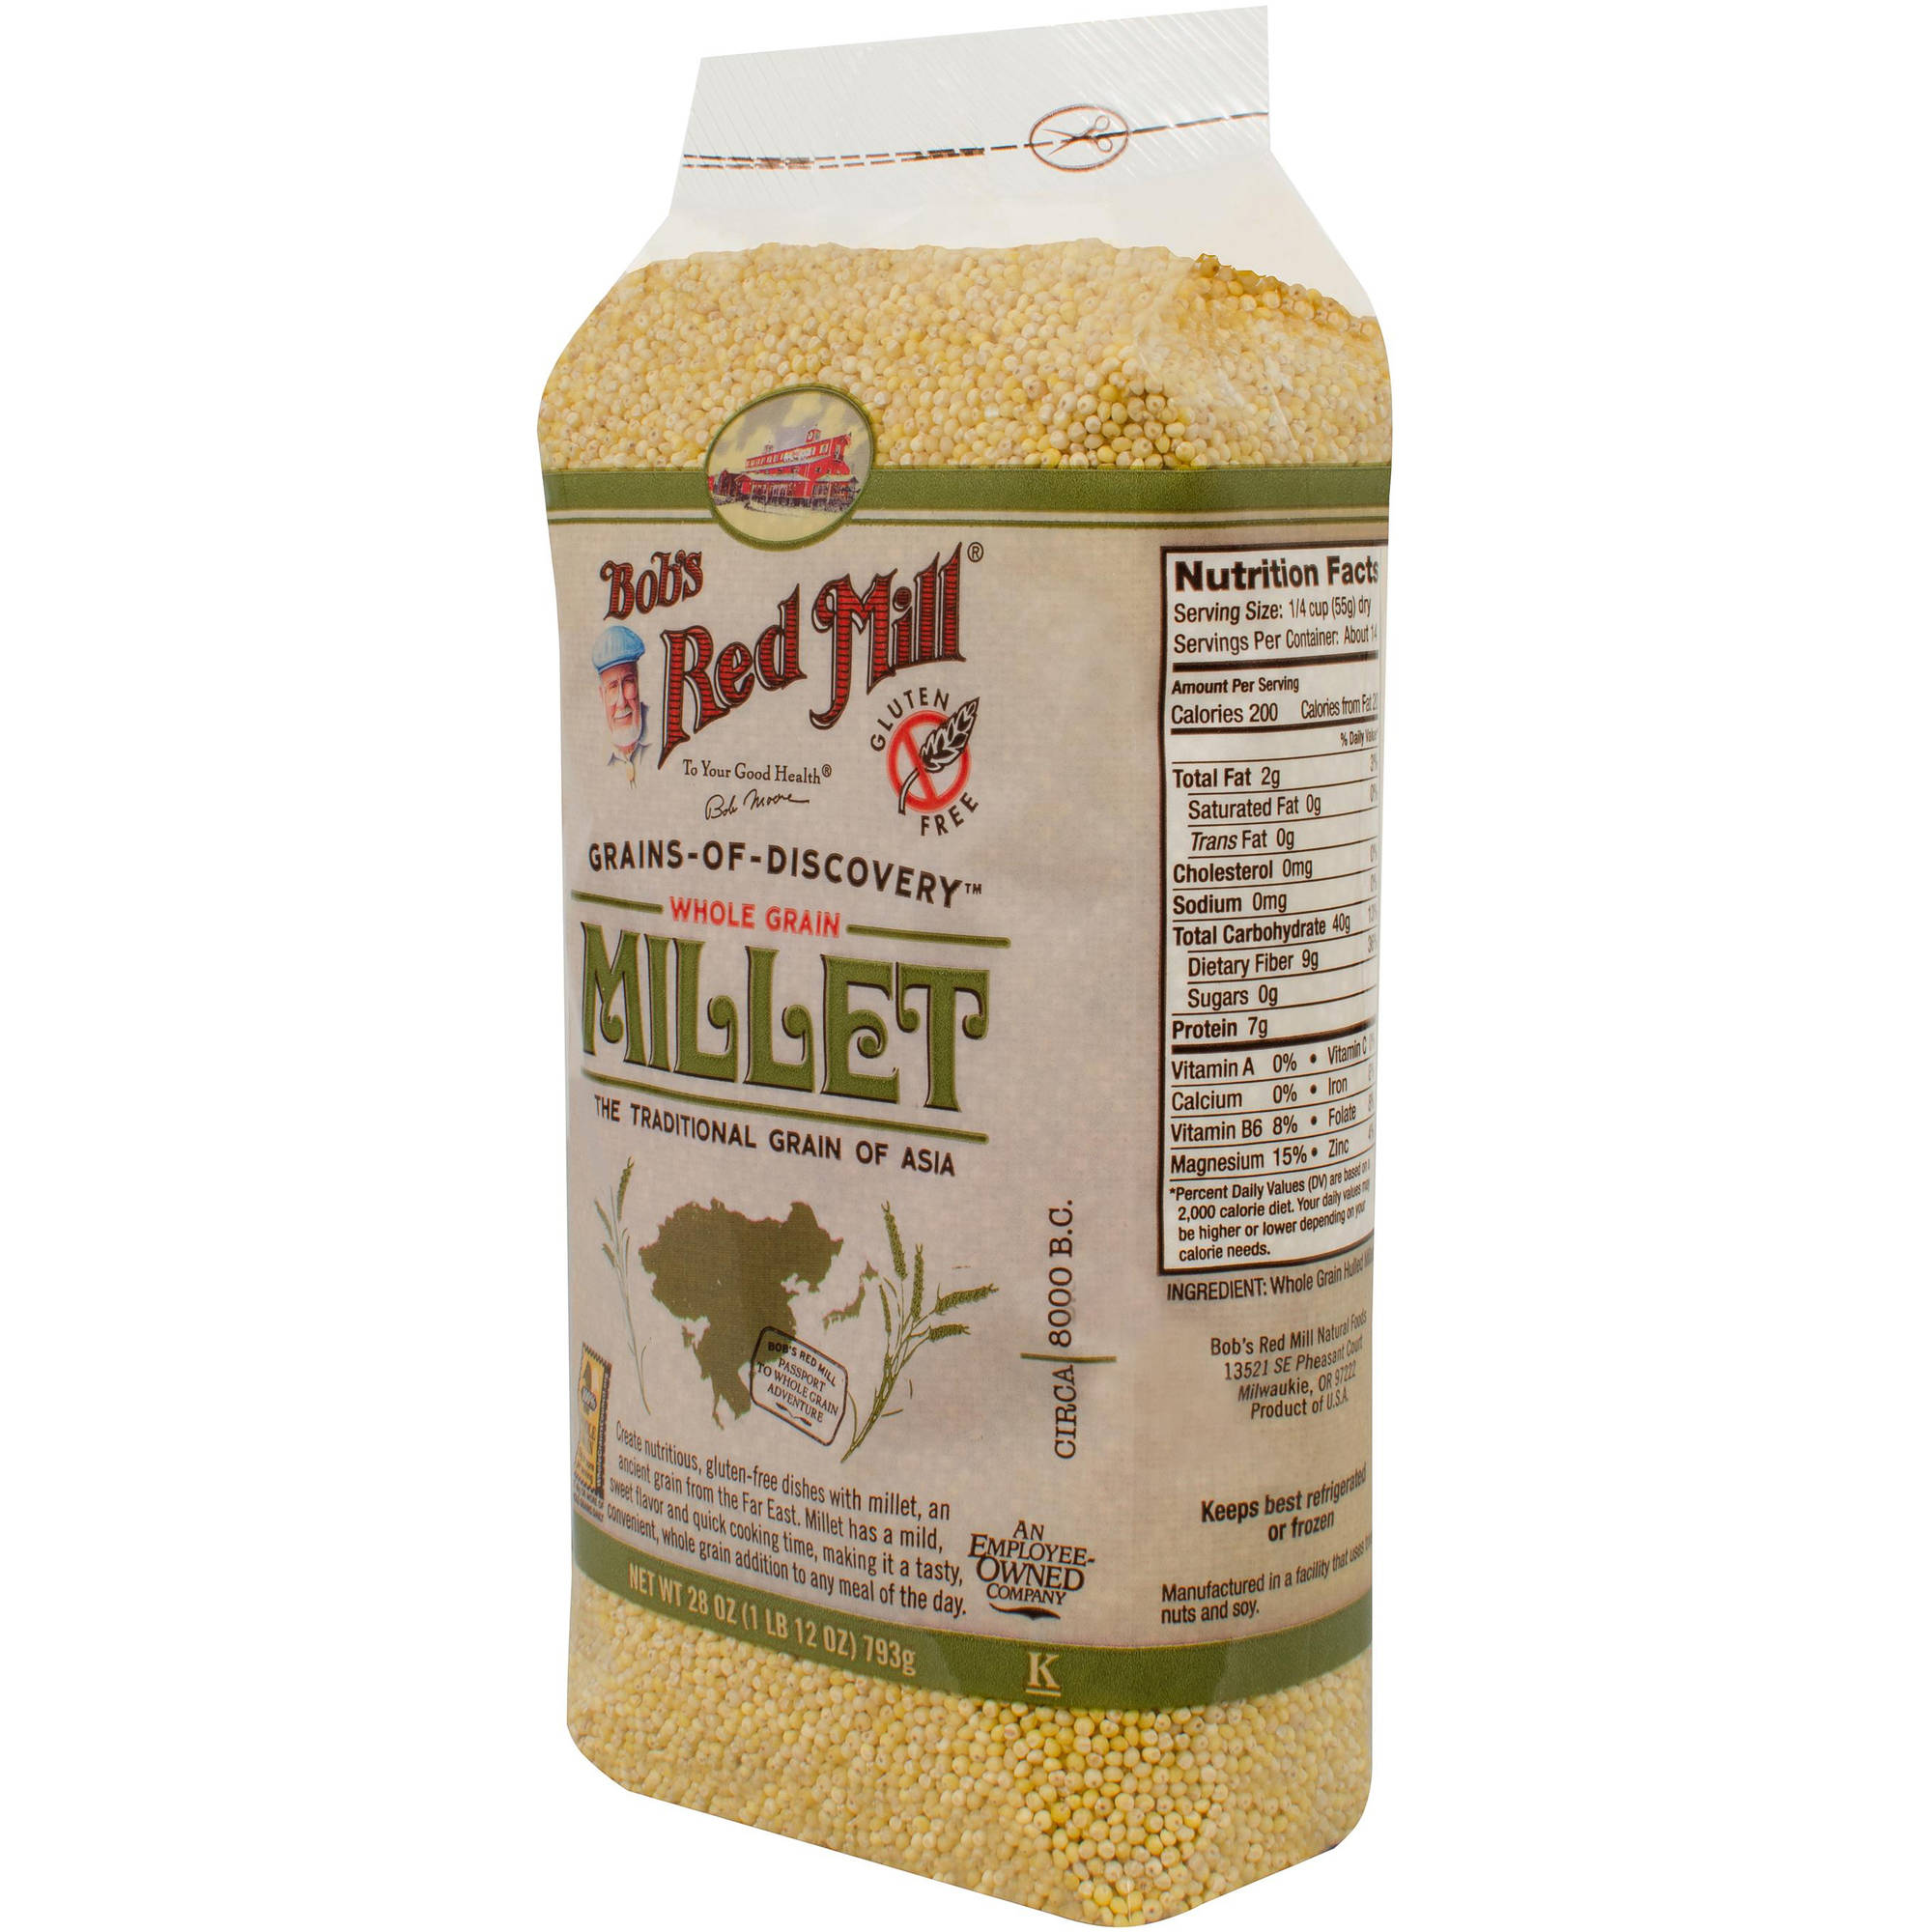 Bob's Red Mill Whole Grain Hulled Millet, 28 oz (Pack of 4) - image 3 of 3